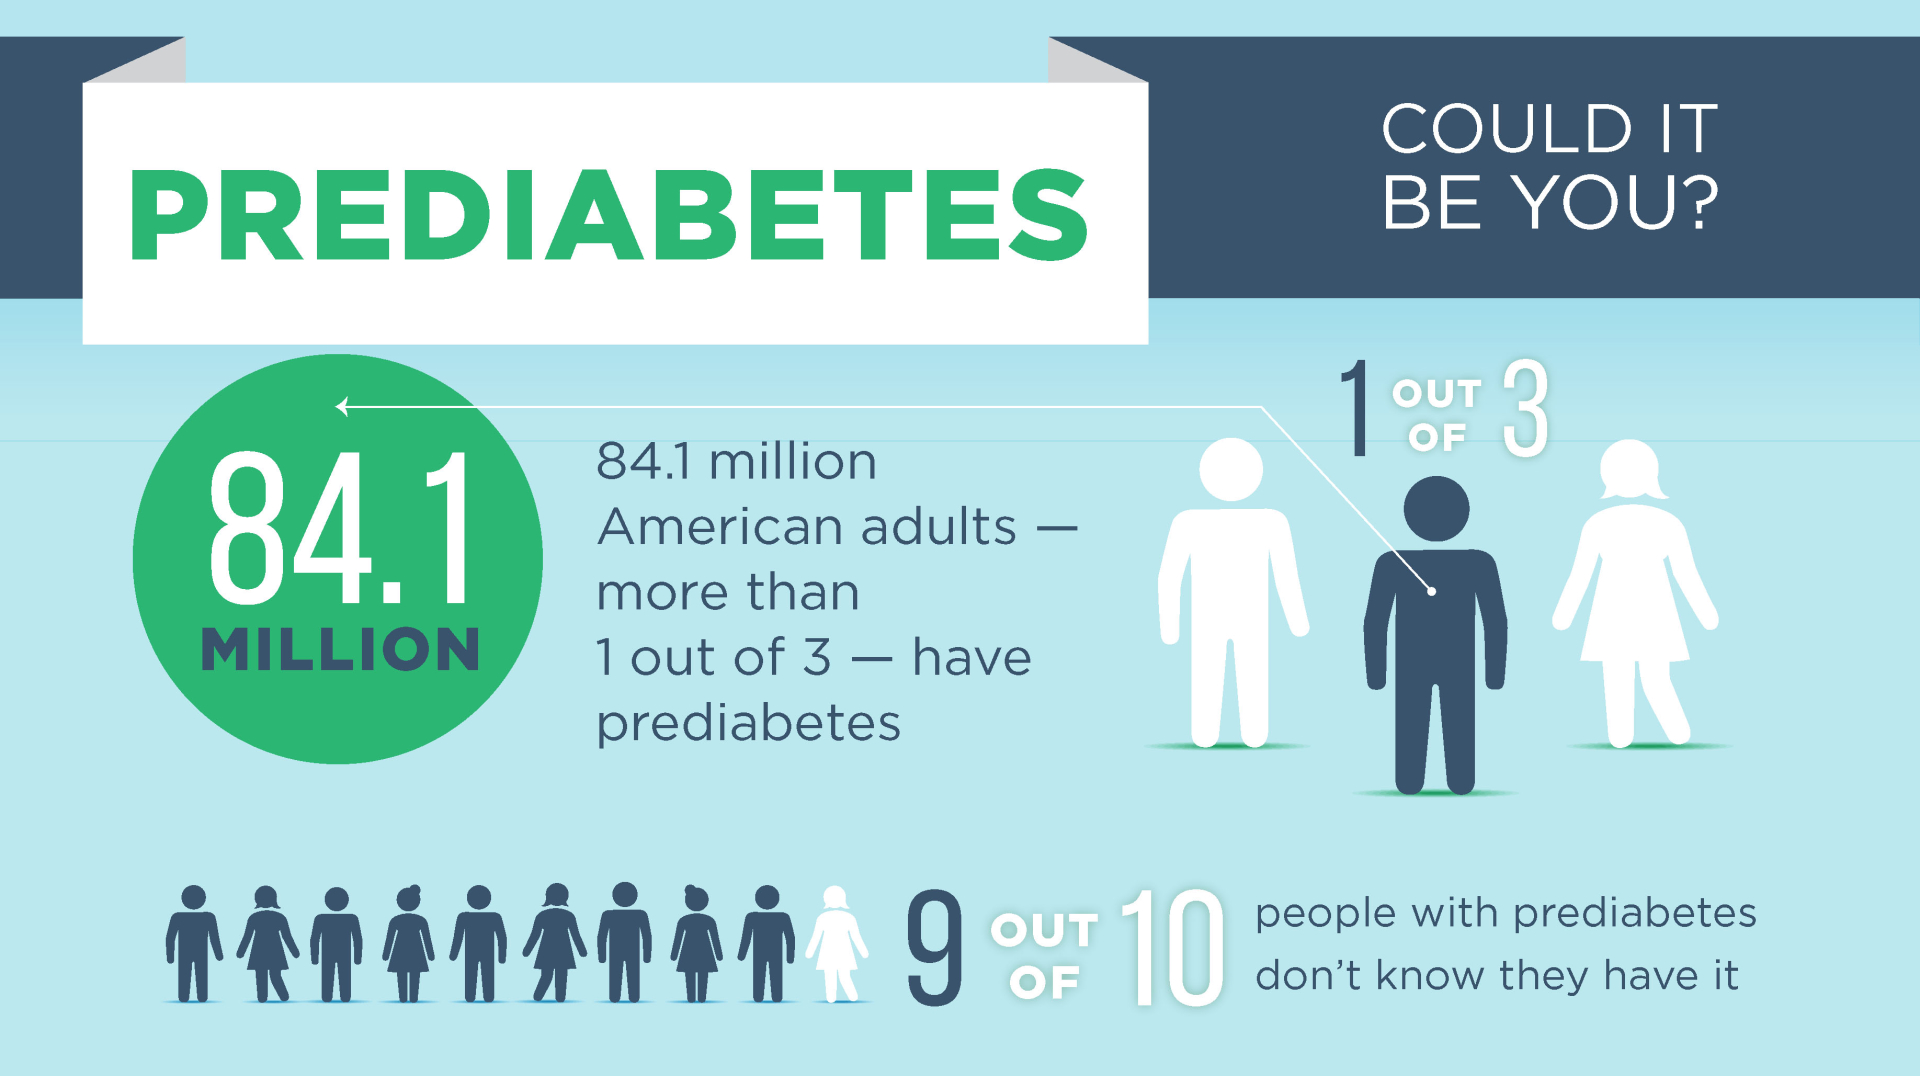 Prediabetes May Sound Harmless, But New Research Warns That It's Not a Benign Condition.